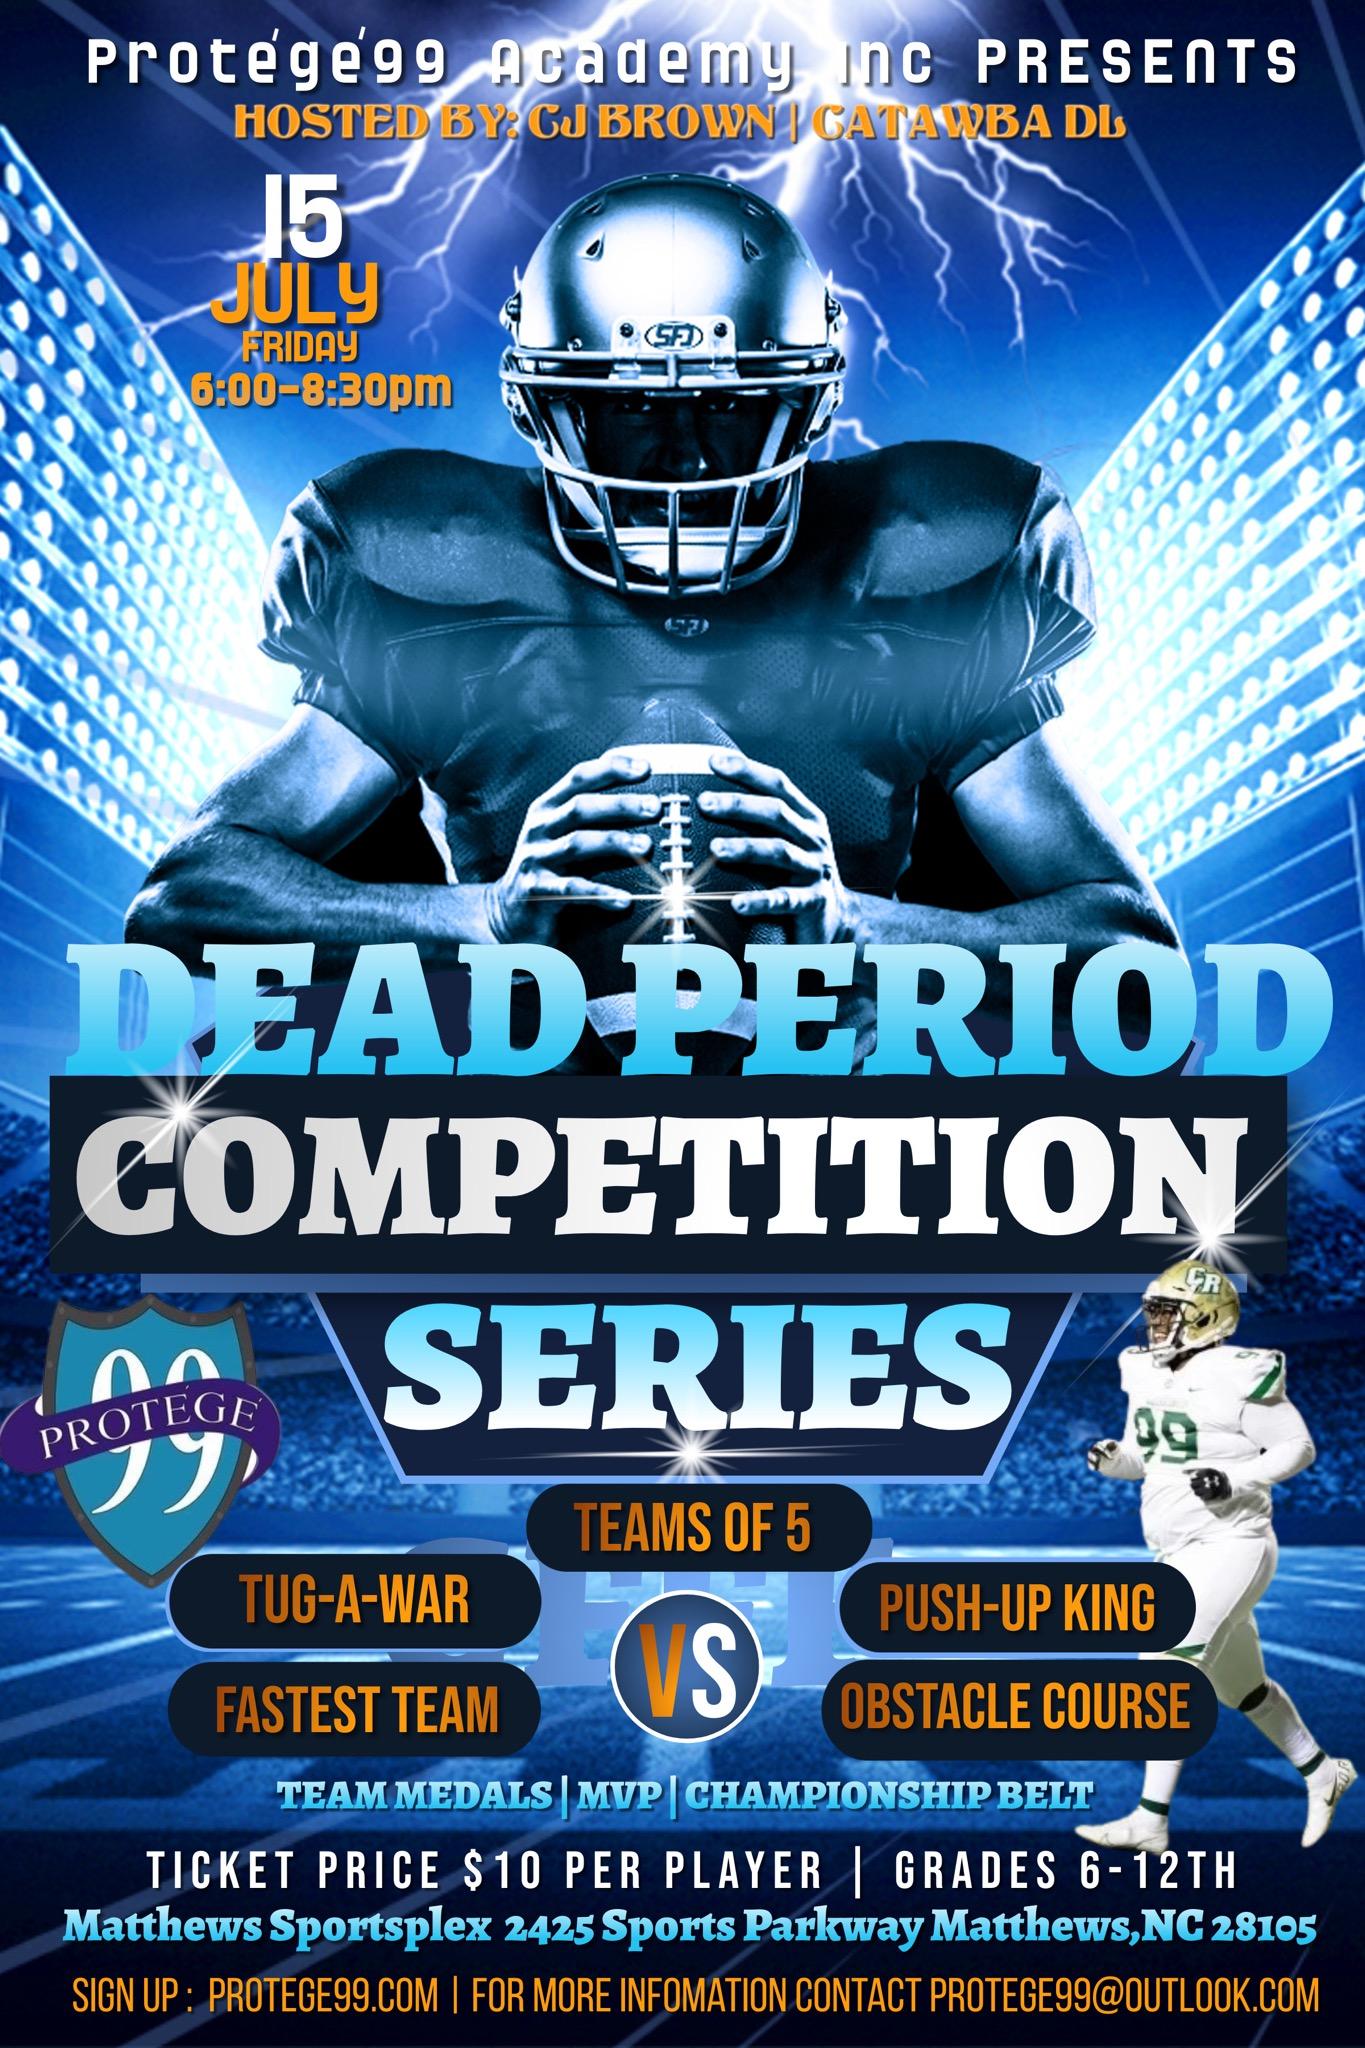 Protege99 Dead Period Competition Series Flyer